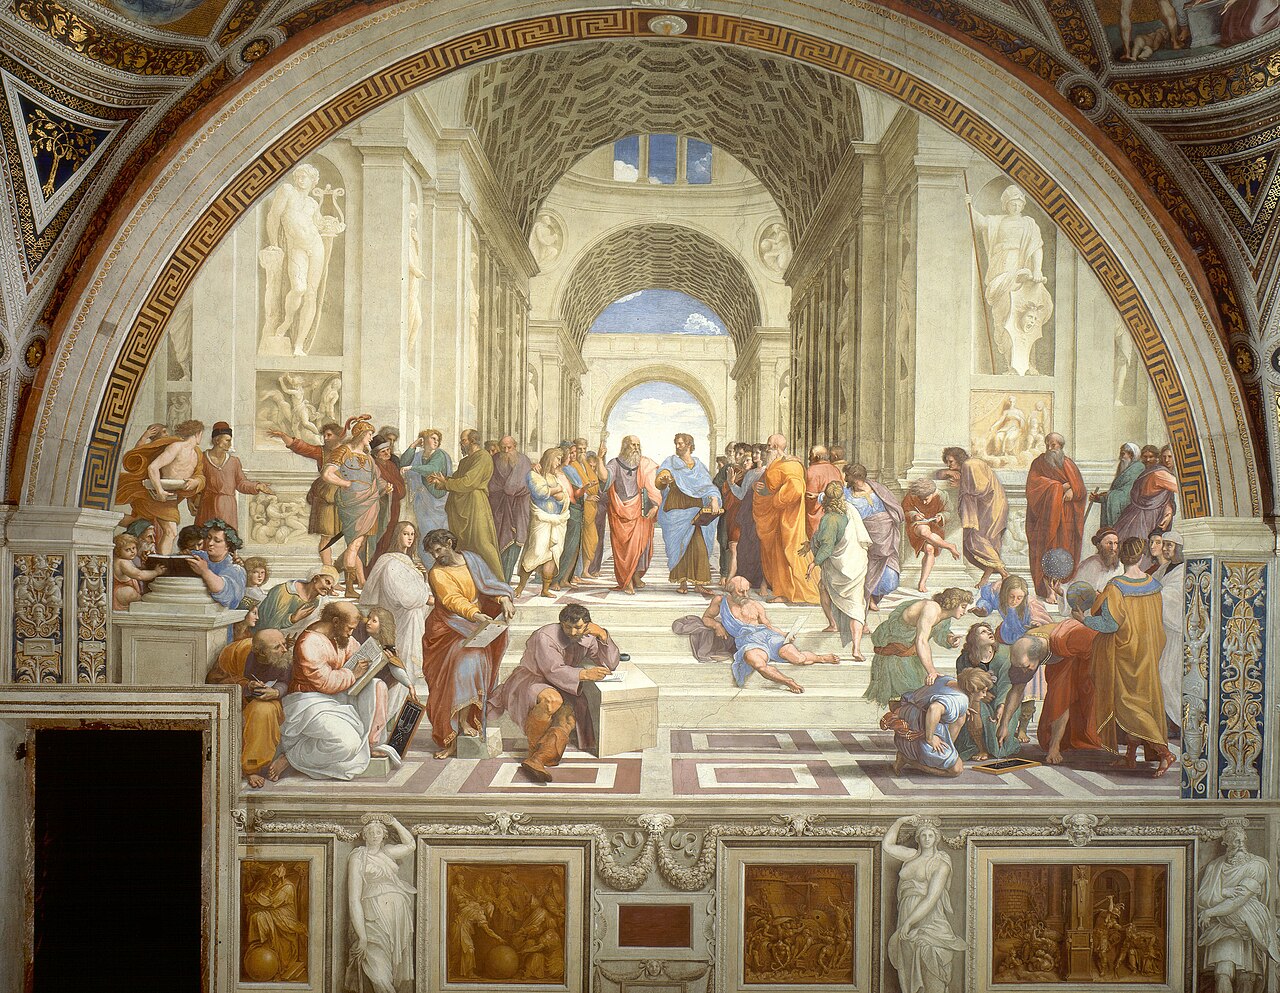 Raphael’s The School of Athens, 1509–1510, a fresco located in the Apostolic Palace in Vatican City